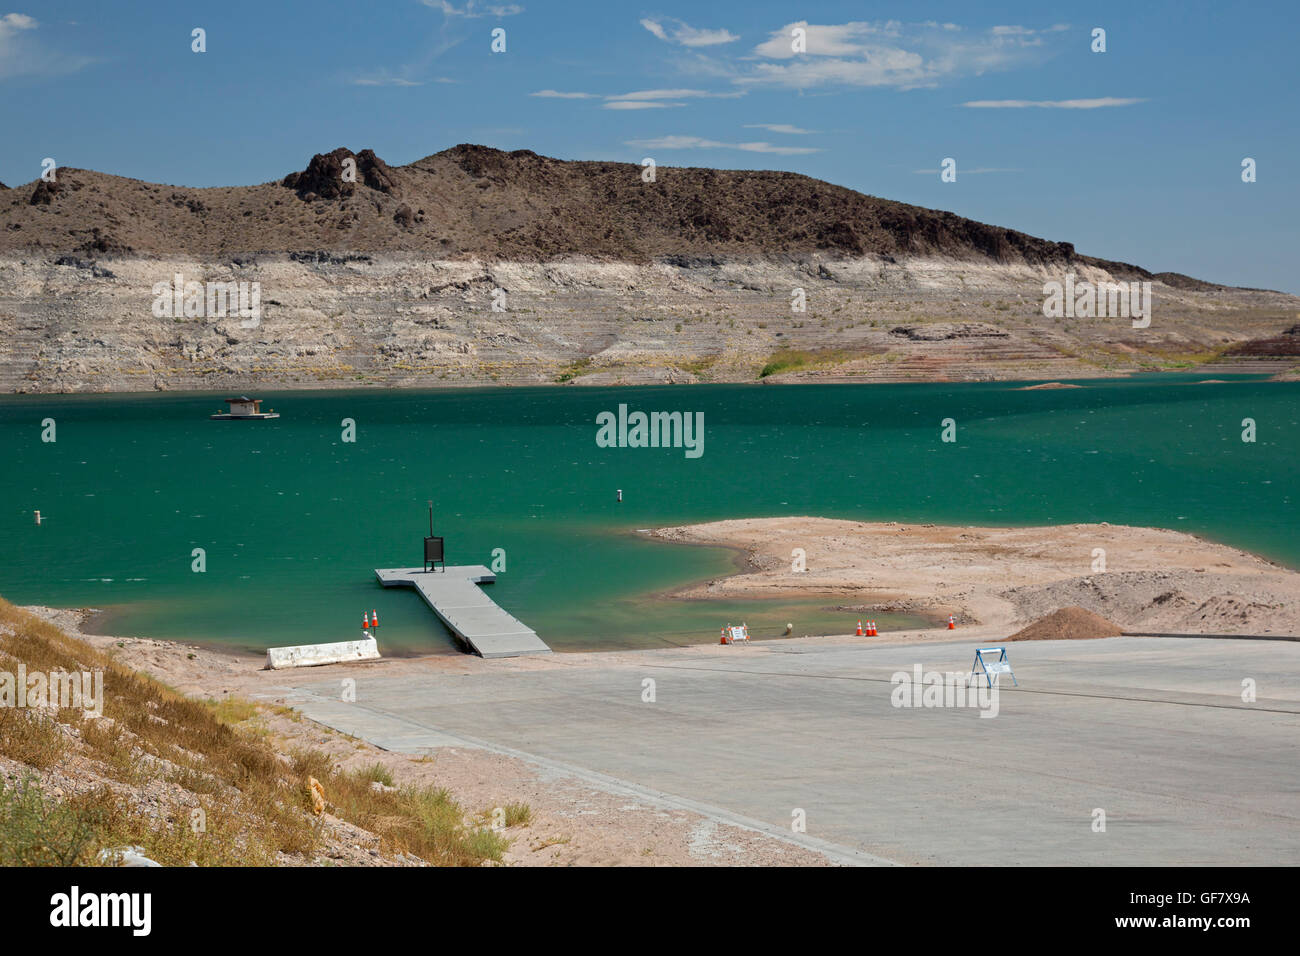 Las Vegas, Nevada - The boat ramp at Echo Bay on Lake Mead can handle only small craft due to falling water levels. Stock Photo